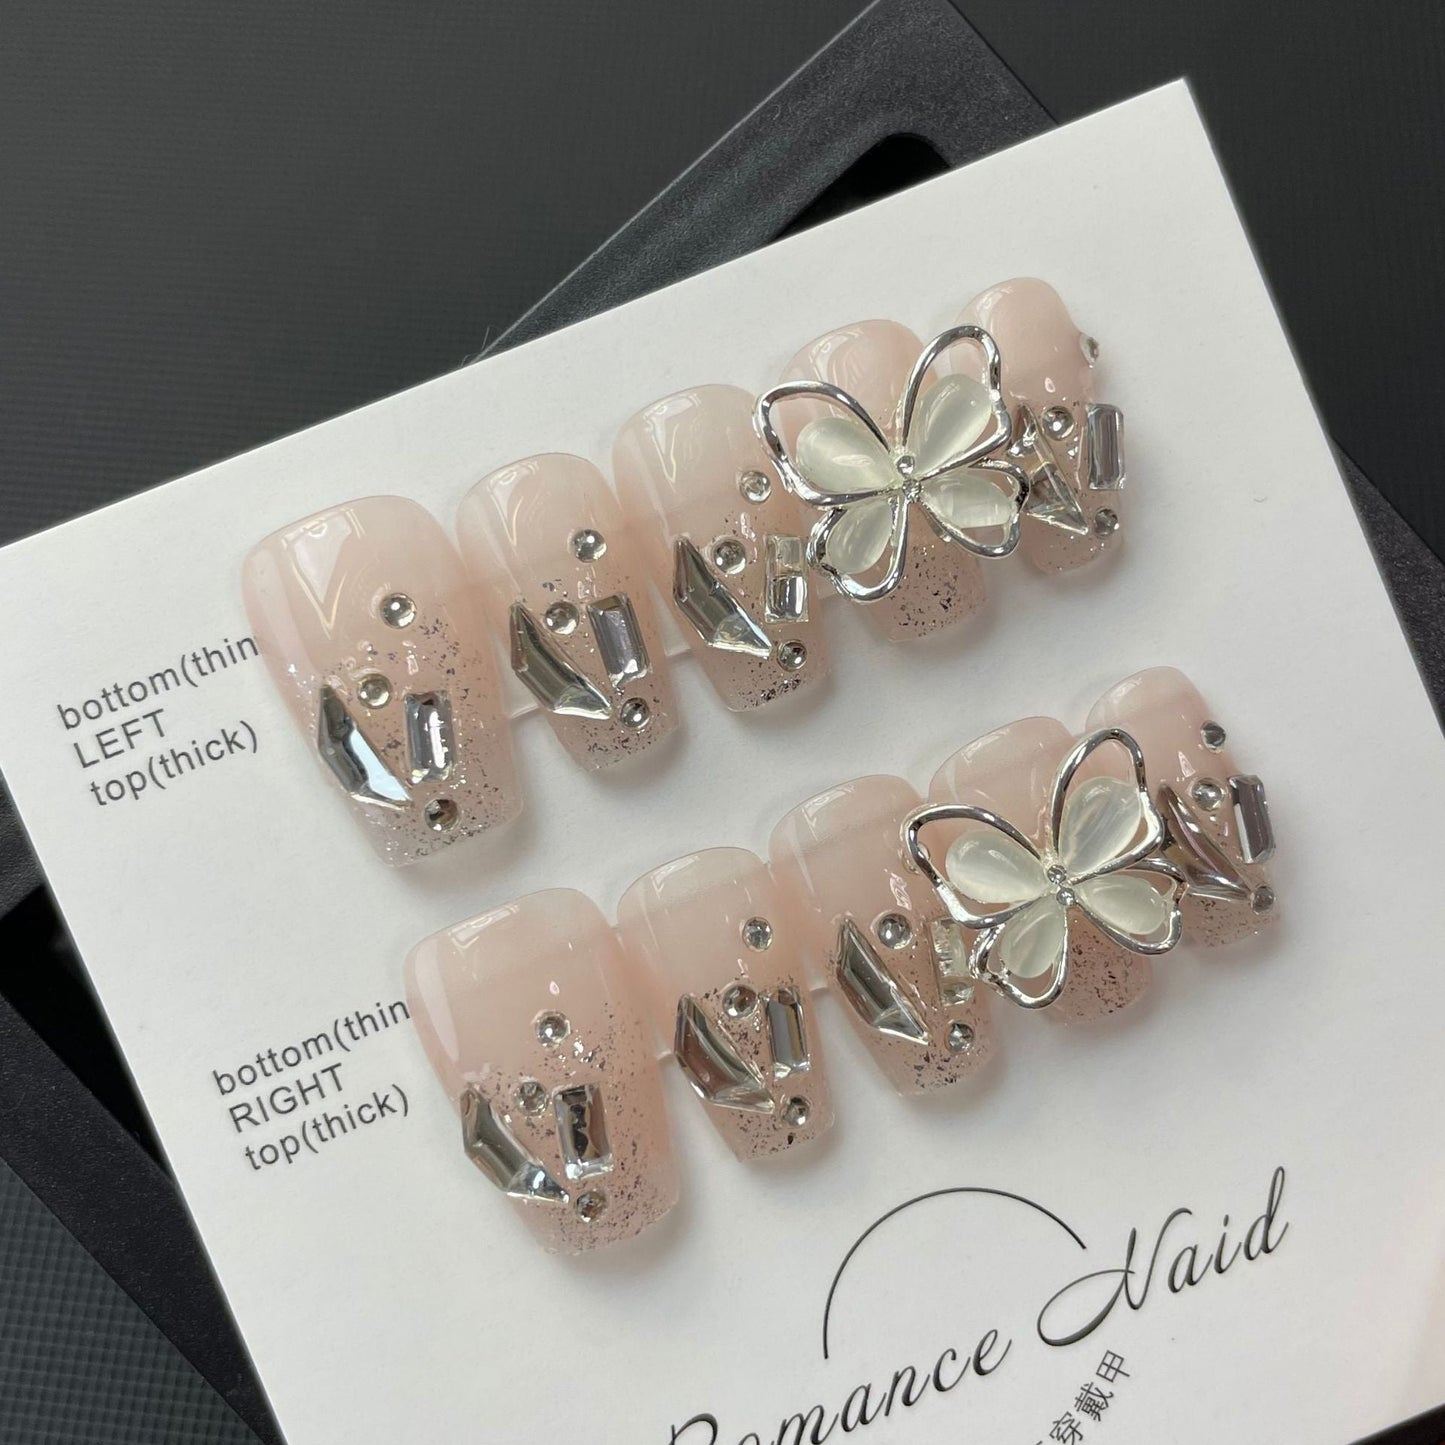 694/695 Butterfly style press on nails 100% handmade false nails pink nude color